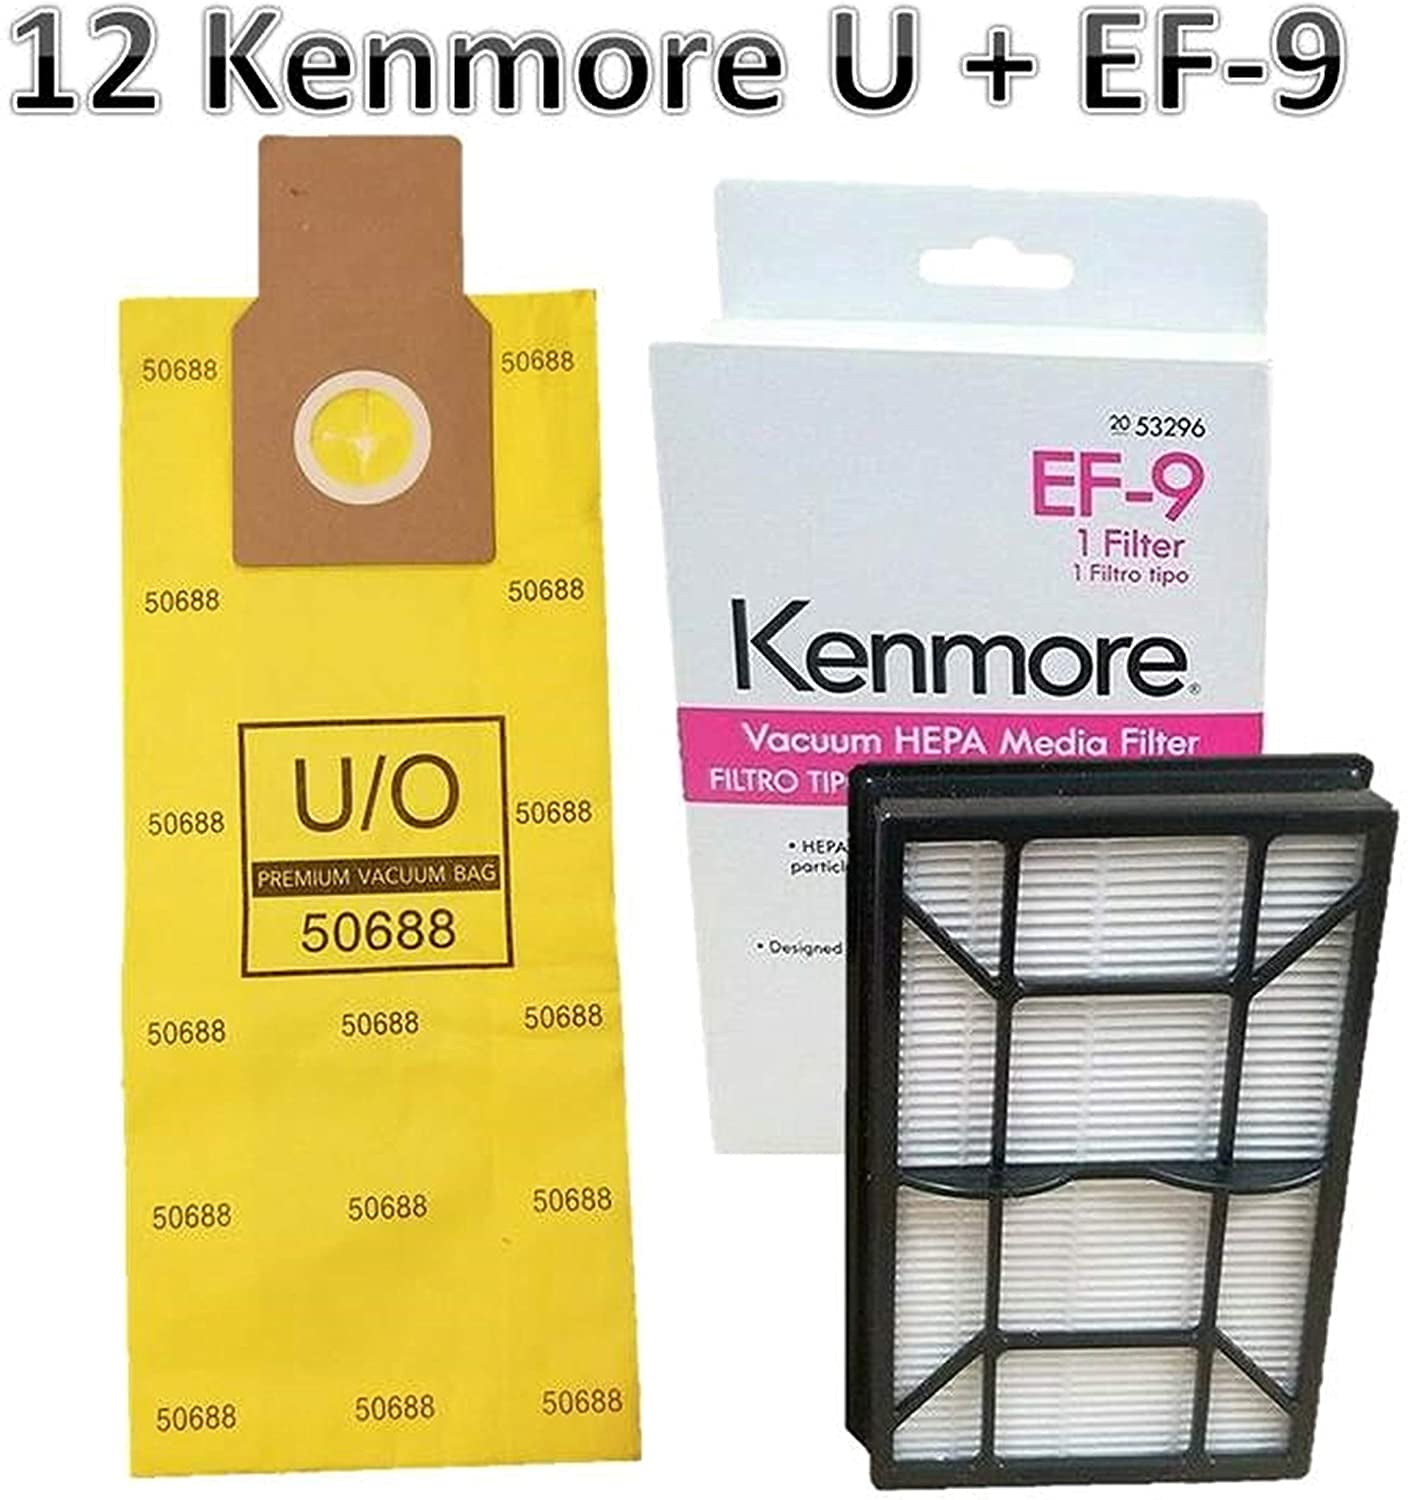 Replacement Kit for Kenmore Elite 31150 12 Style U Allergen Bags 50688  1 Sears  Kenmore EF9 Filter 53296 Kenmore Elite 31150 Bag and Filter Supply Kit   Walmartcom